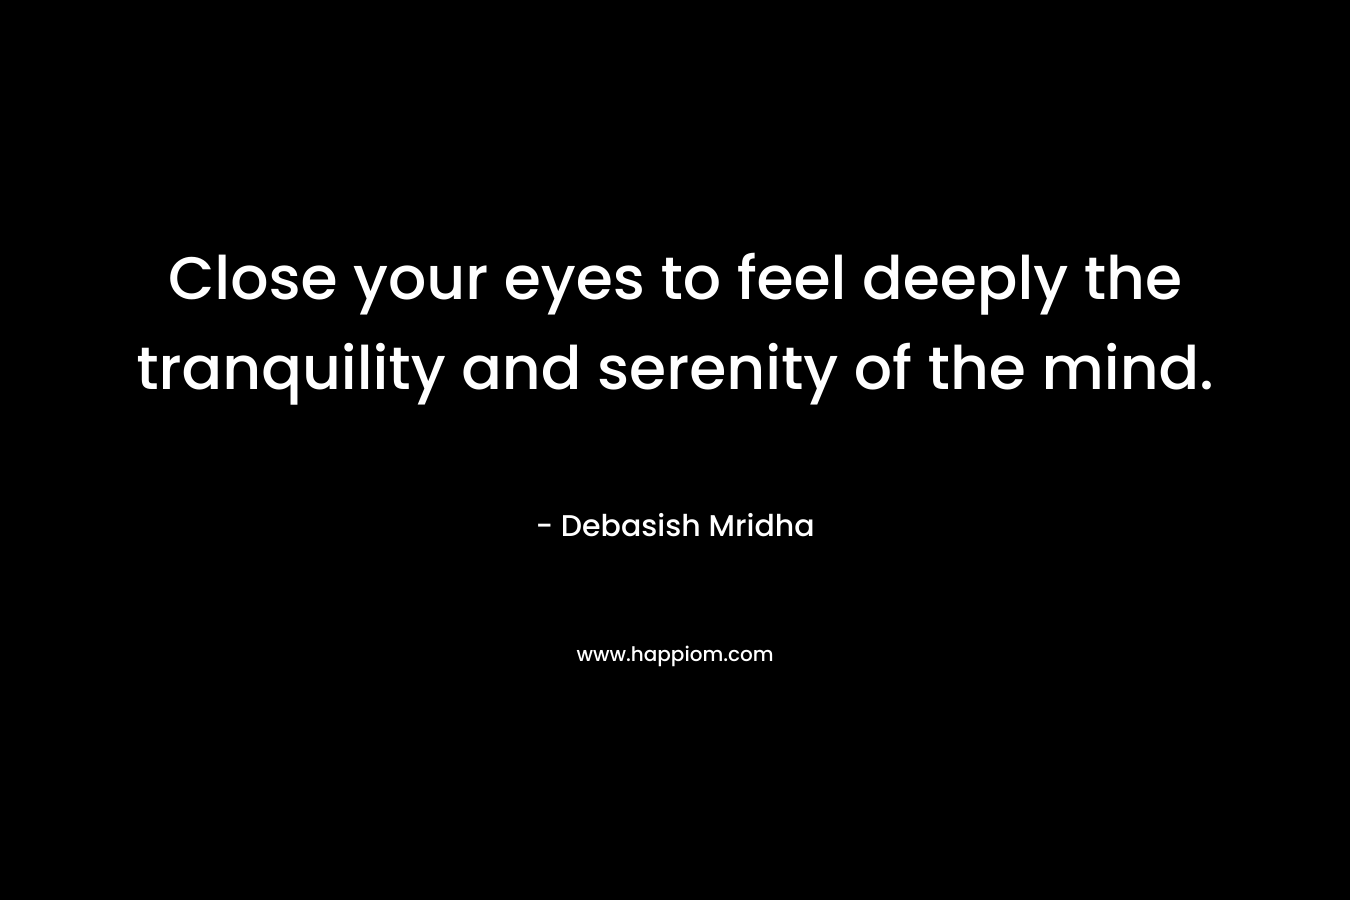 Close your eyes to feel deeply the tranquility and serenity of the mind.